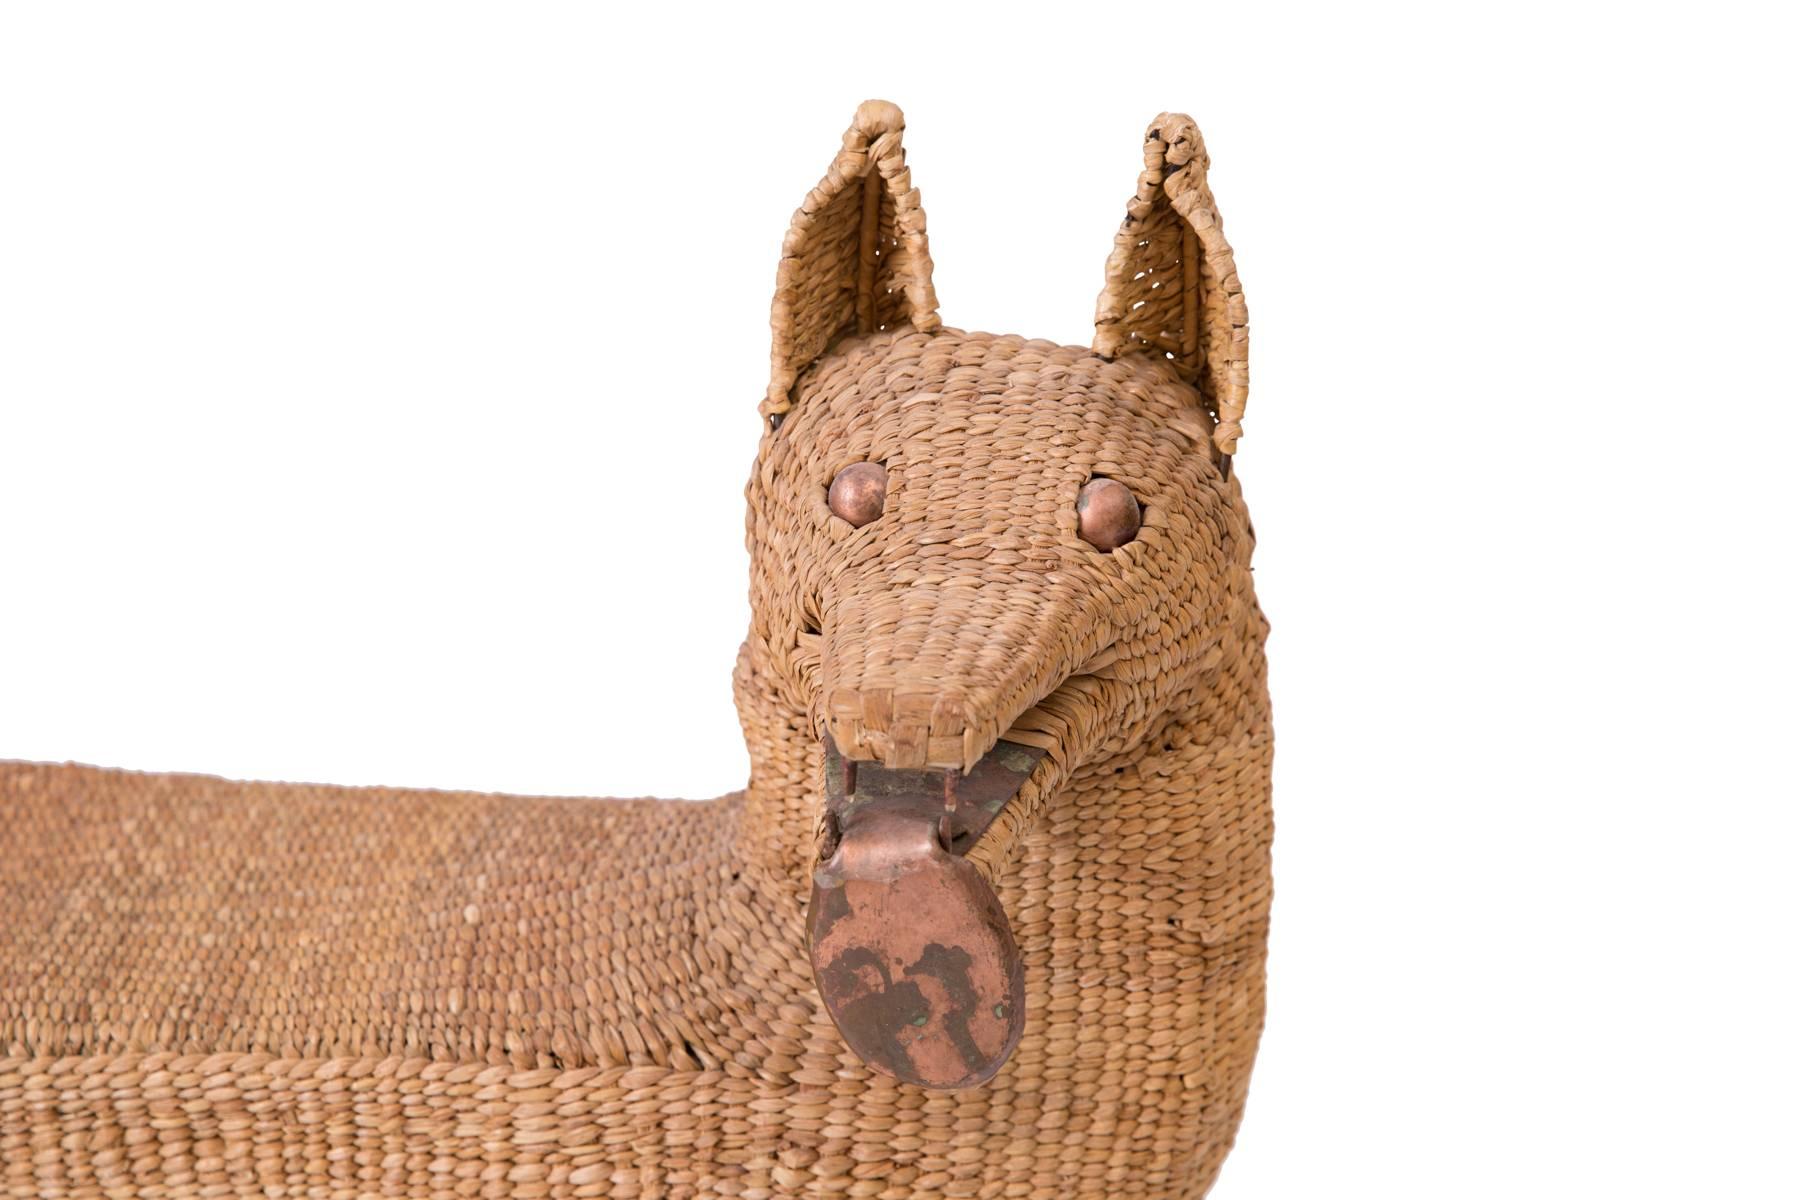 Mario Lopez Torres woven reed and copper dog bench or sculpture. This example utilizes reeds picked from the marshes of Ihuatzio Mexico that are then dried and carefully wrapped around iron forms. The ears, eyes and tongue are patinated copper.